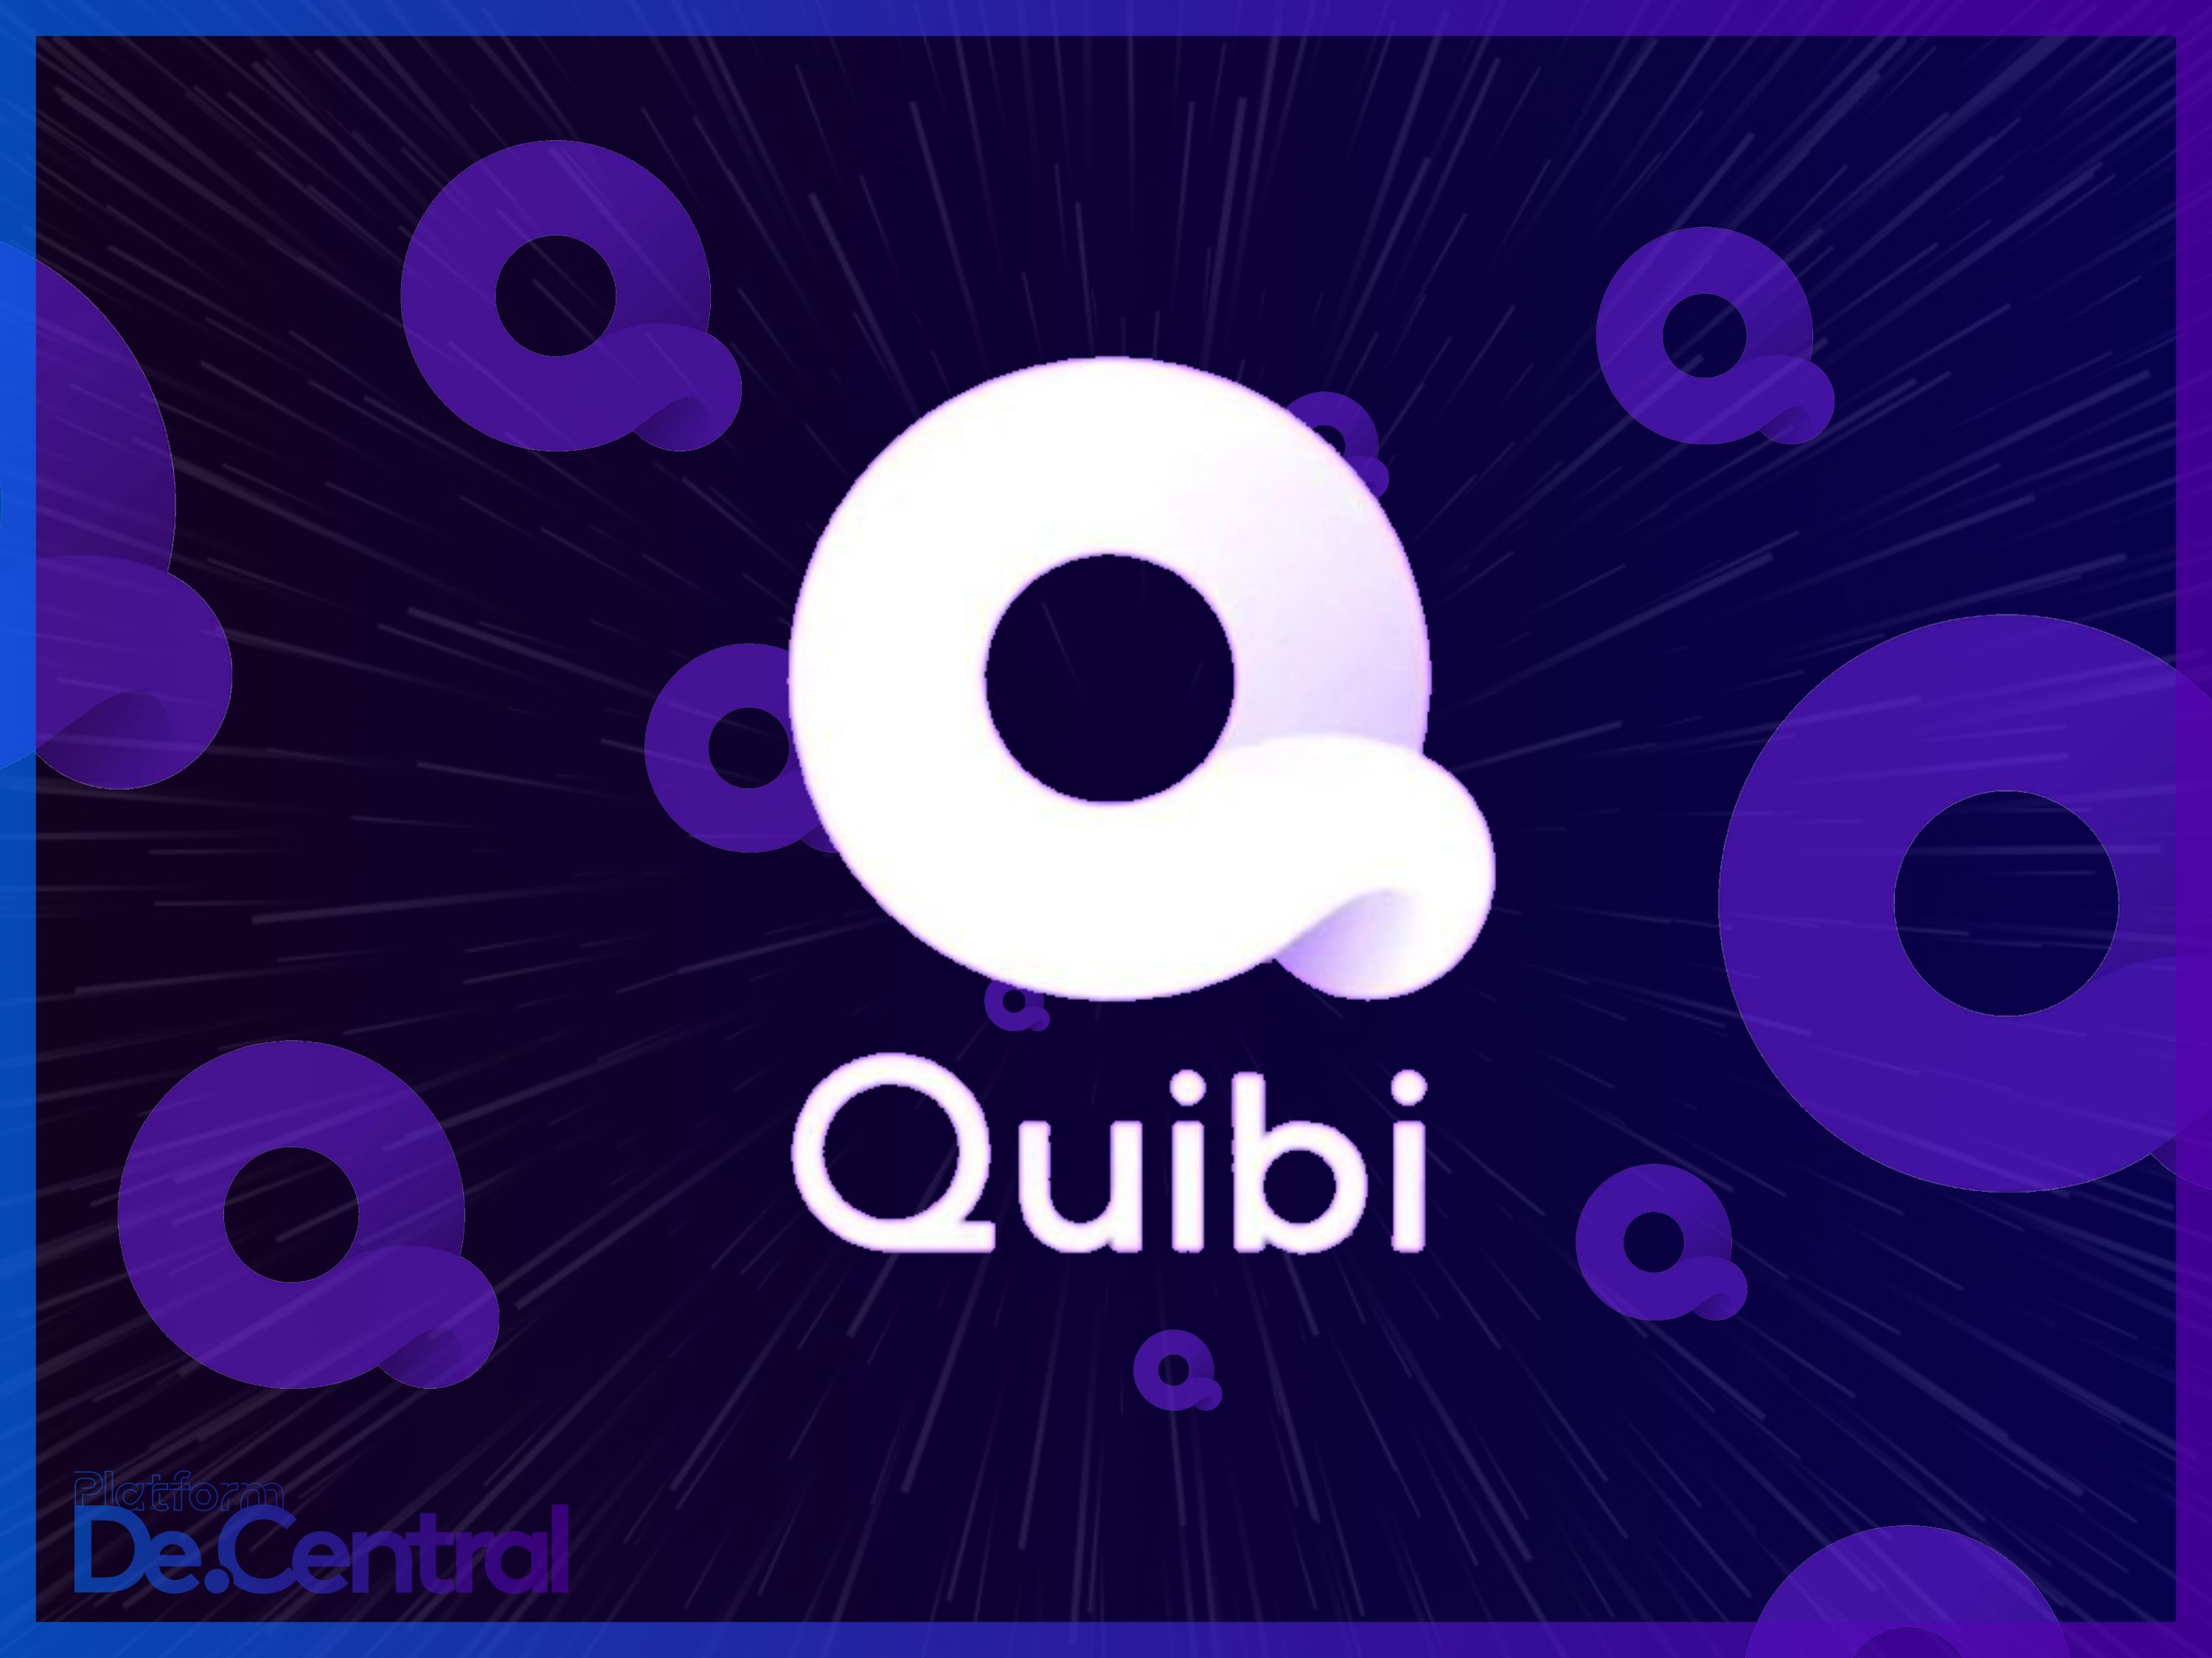 Quibi reportedly lost 90% of users after the free trial ended